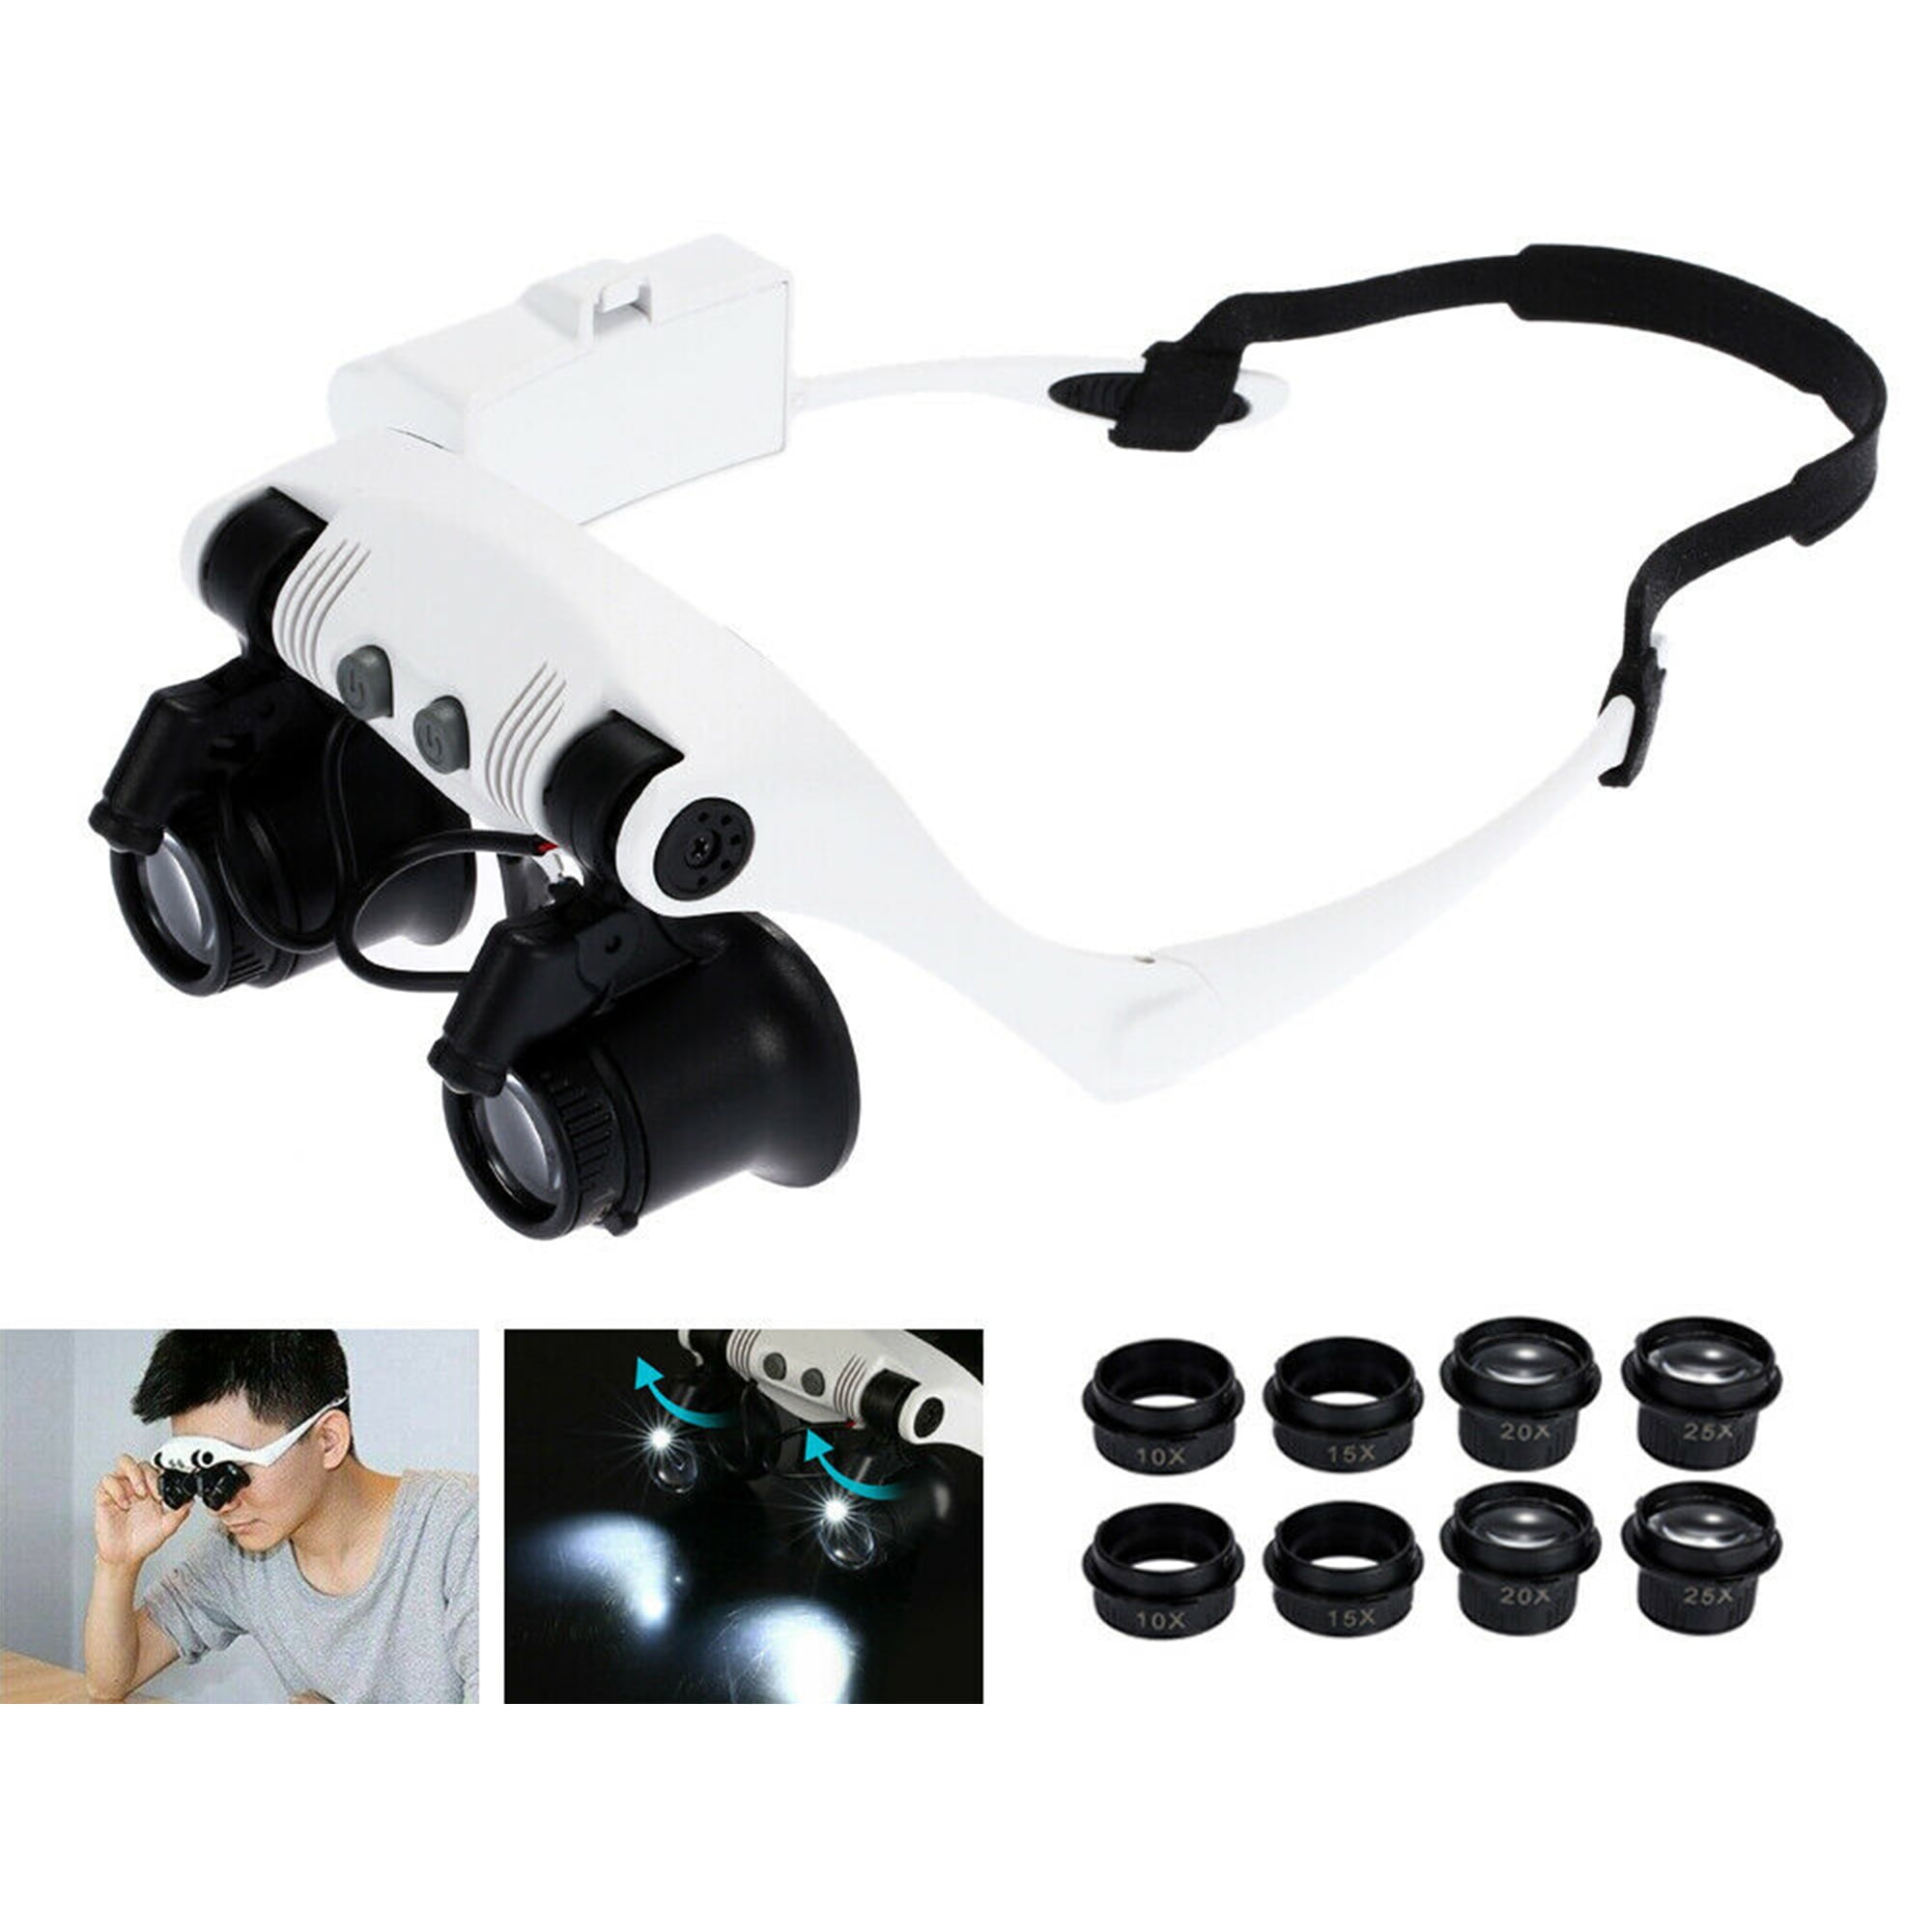 LED Magnification Glasses With Lights With 10X 25X Lens For Jewelry And  Watch Repair From Dhgate_shop168, $14.52